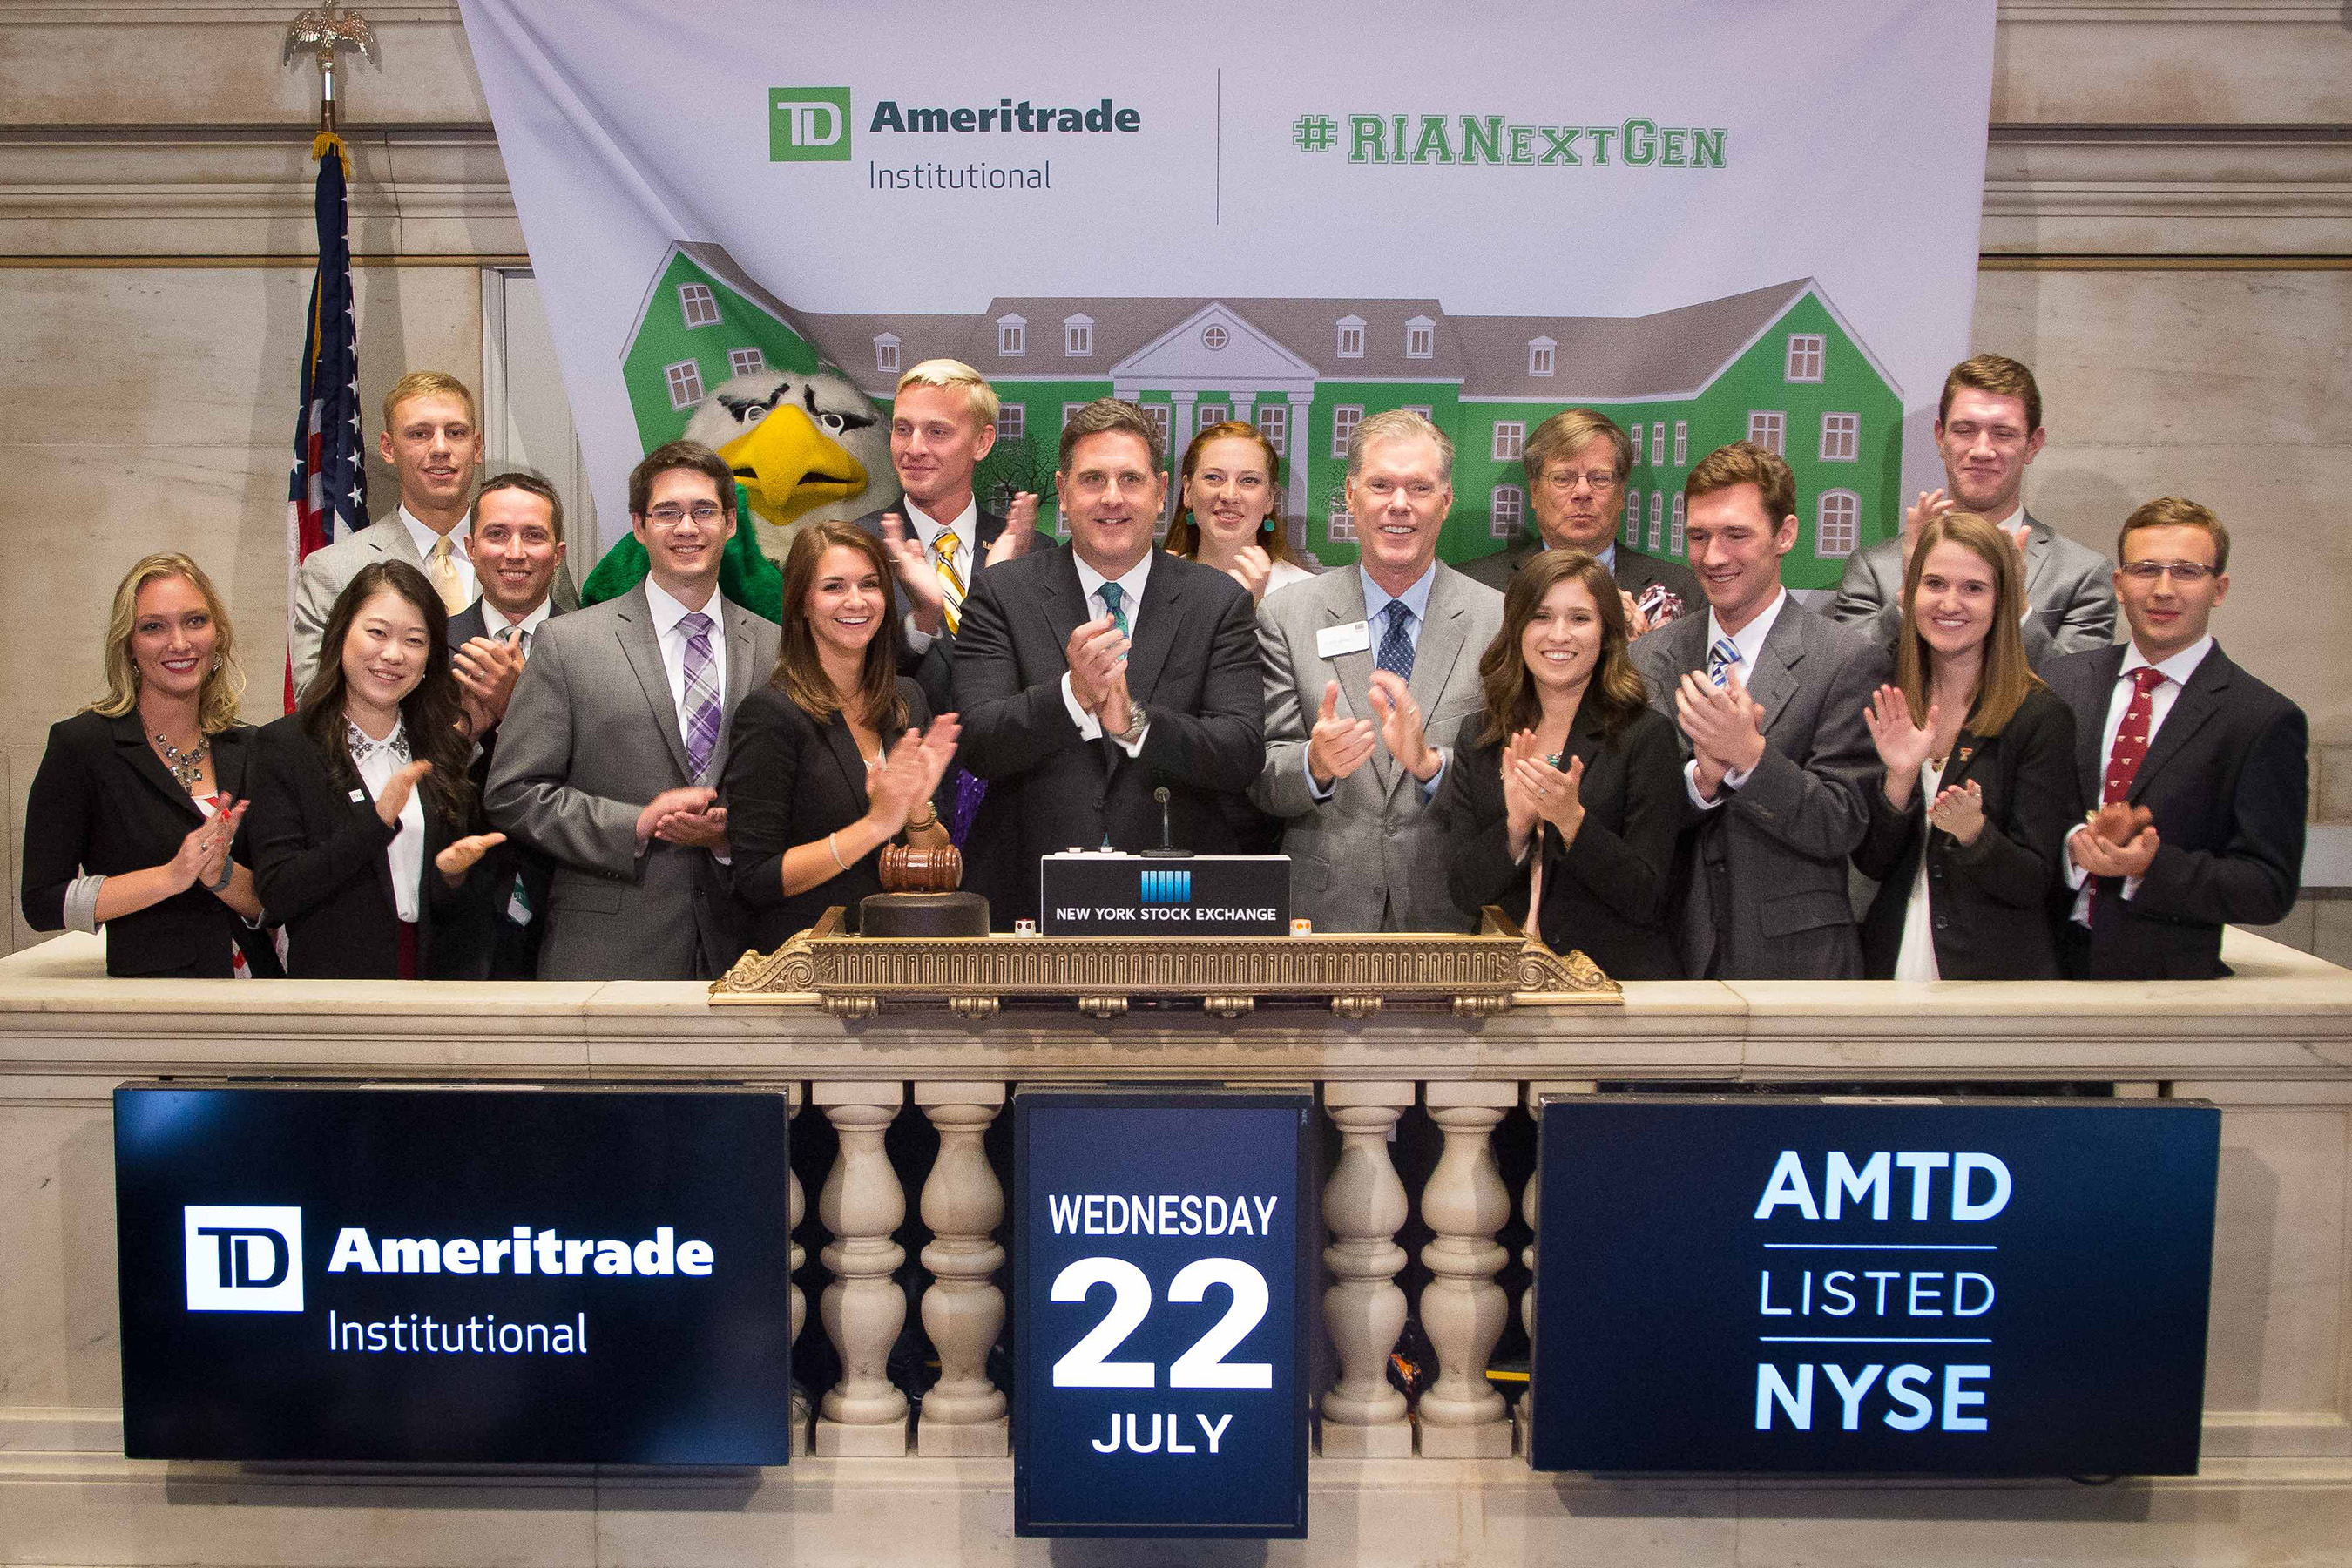 TD Ameritrade Institutional supports a new generation of financial professionals, hosts RIA Next Gen scholarship and grant winners on Wall Street